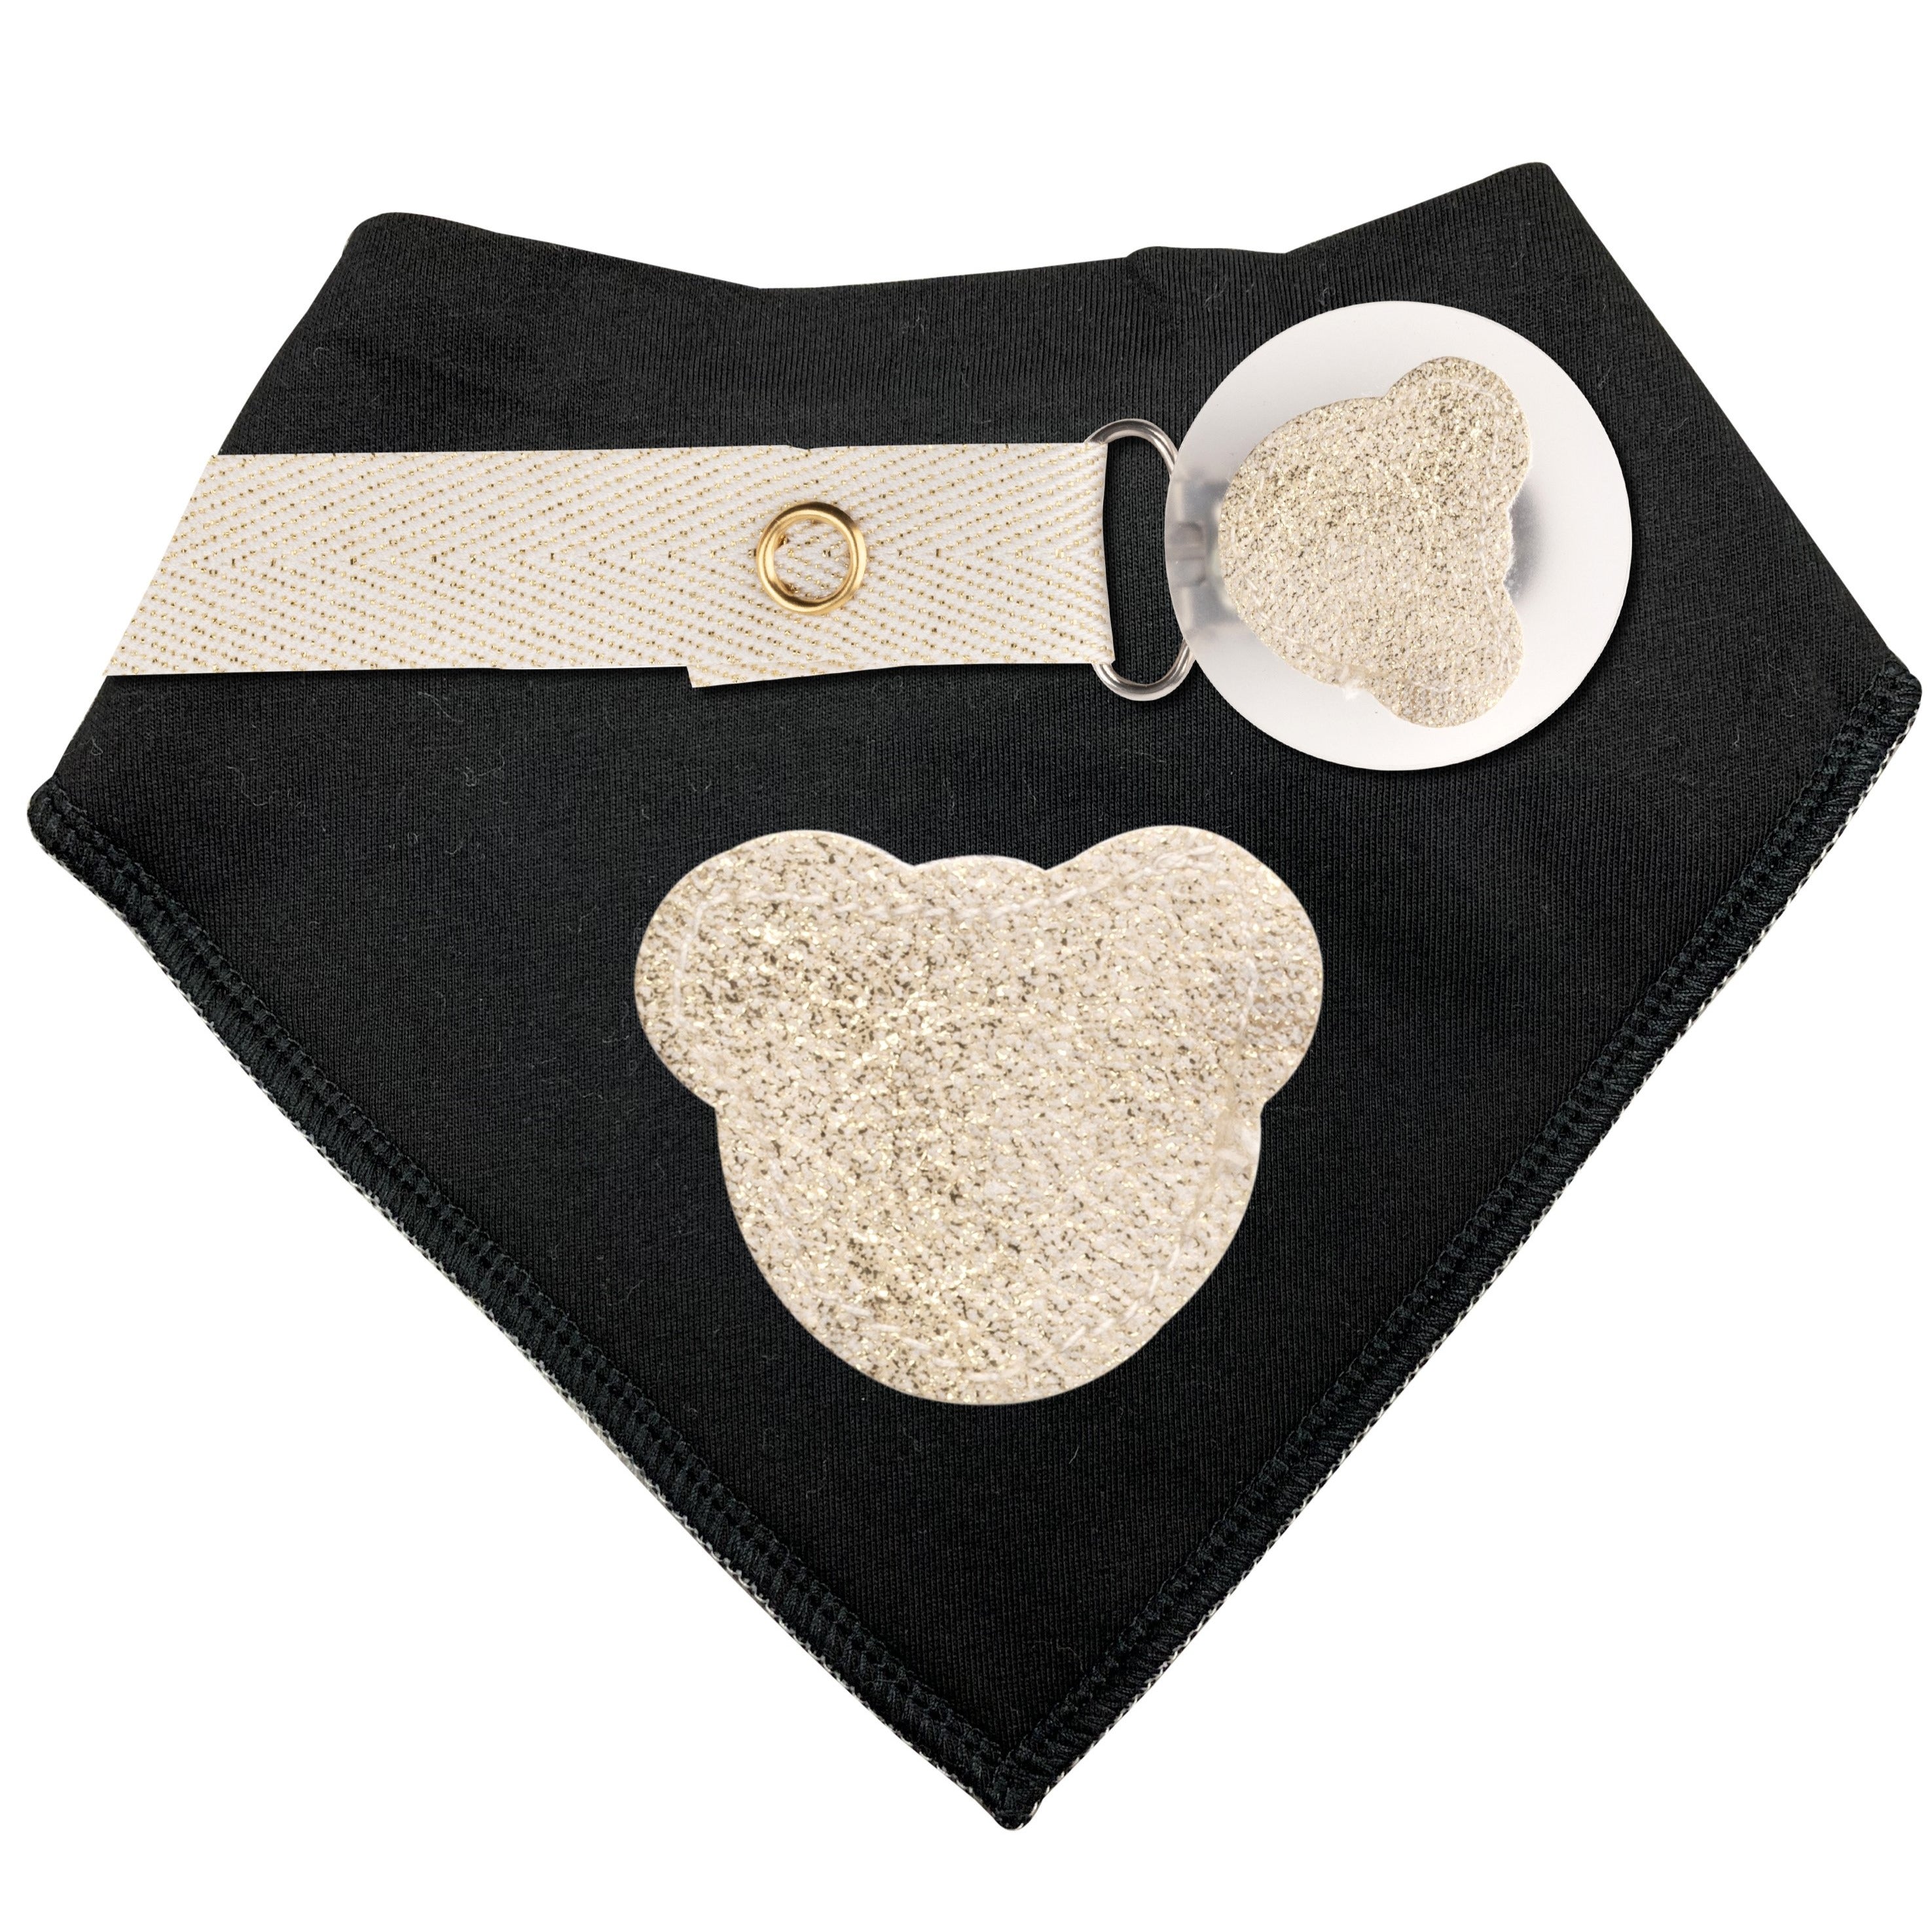 Gold Metallic Sparkle  leather Teddy bib and clip GIFT SET